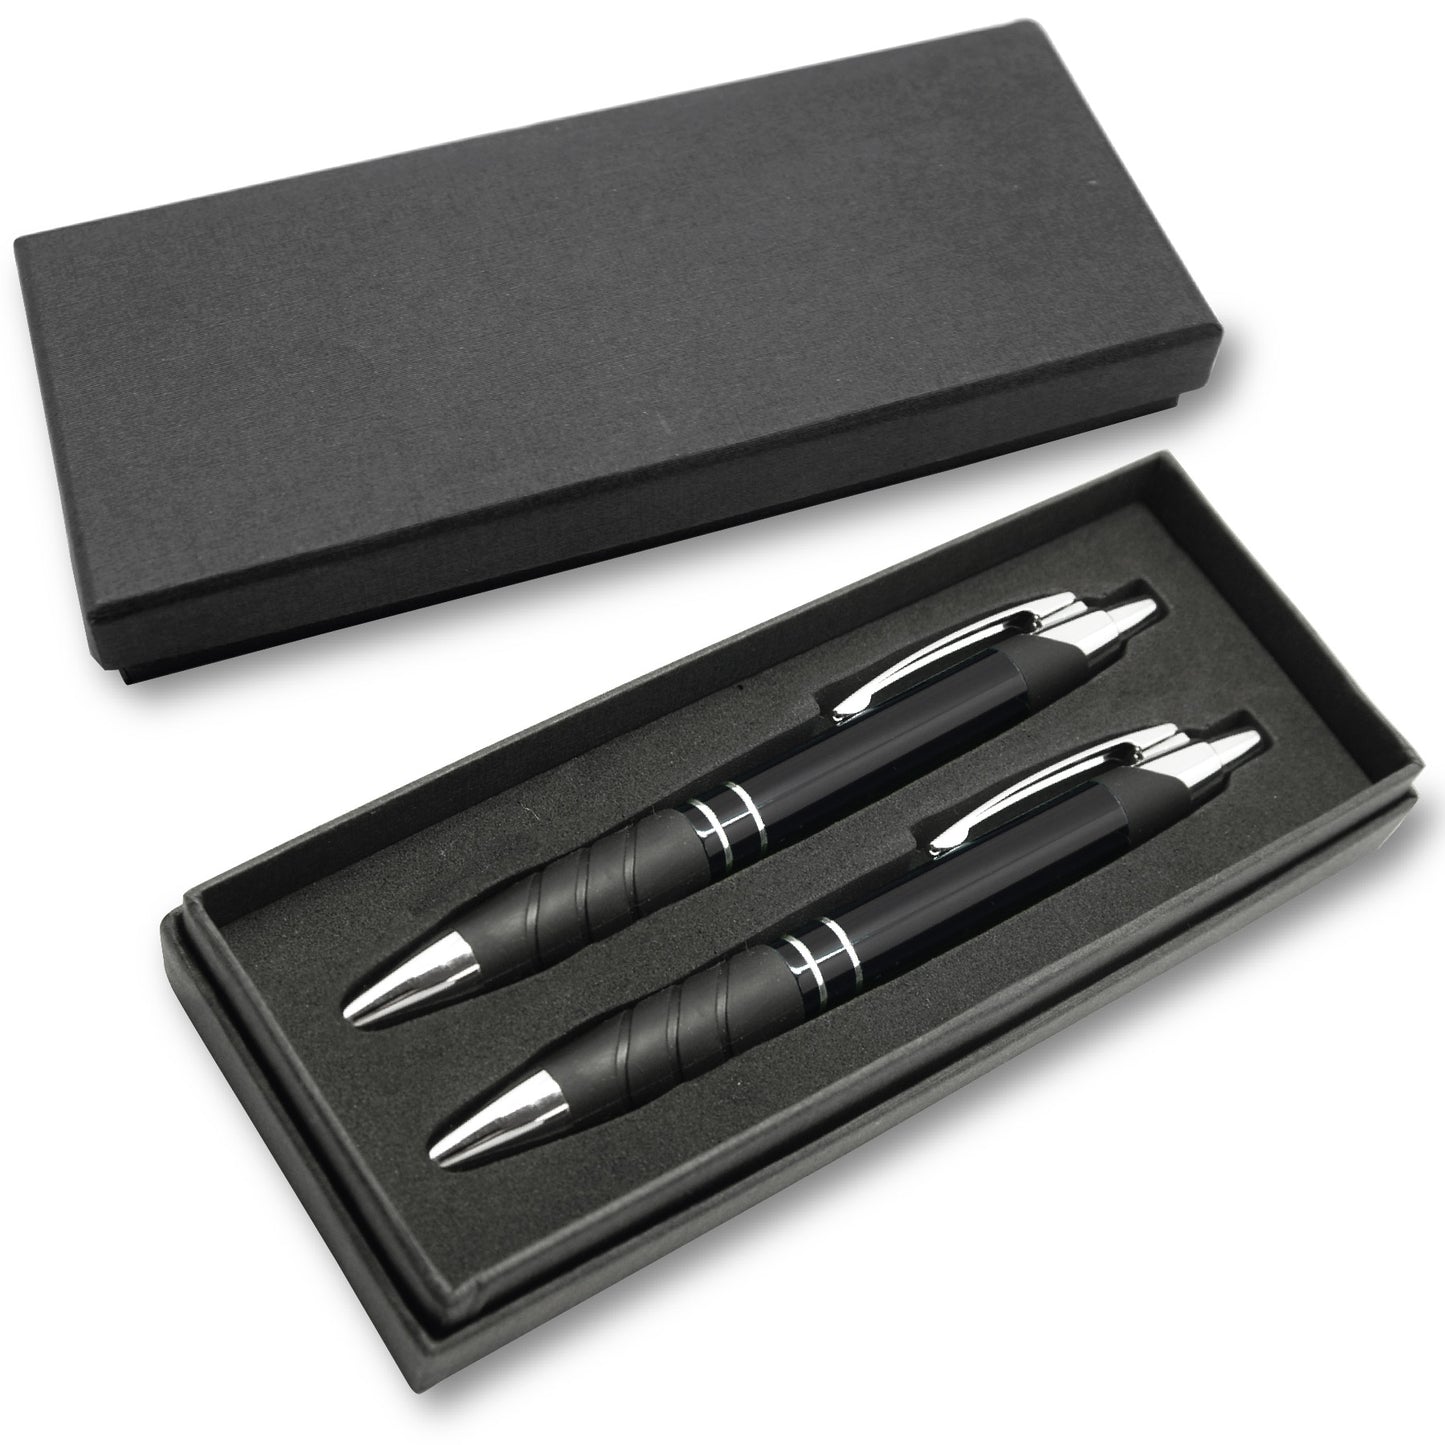 Stratford Deluxe Pen and Pencil Set